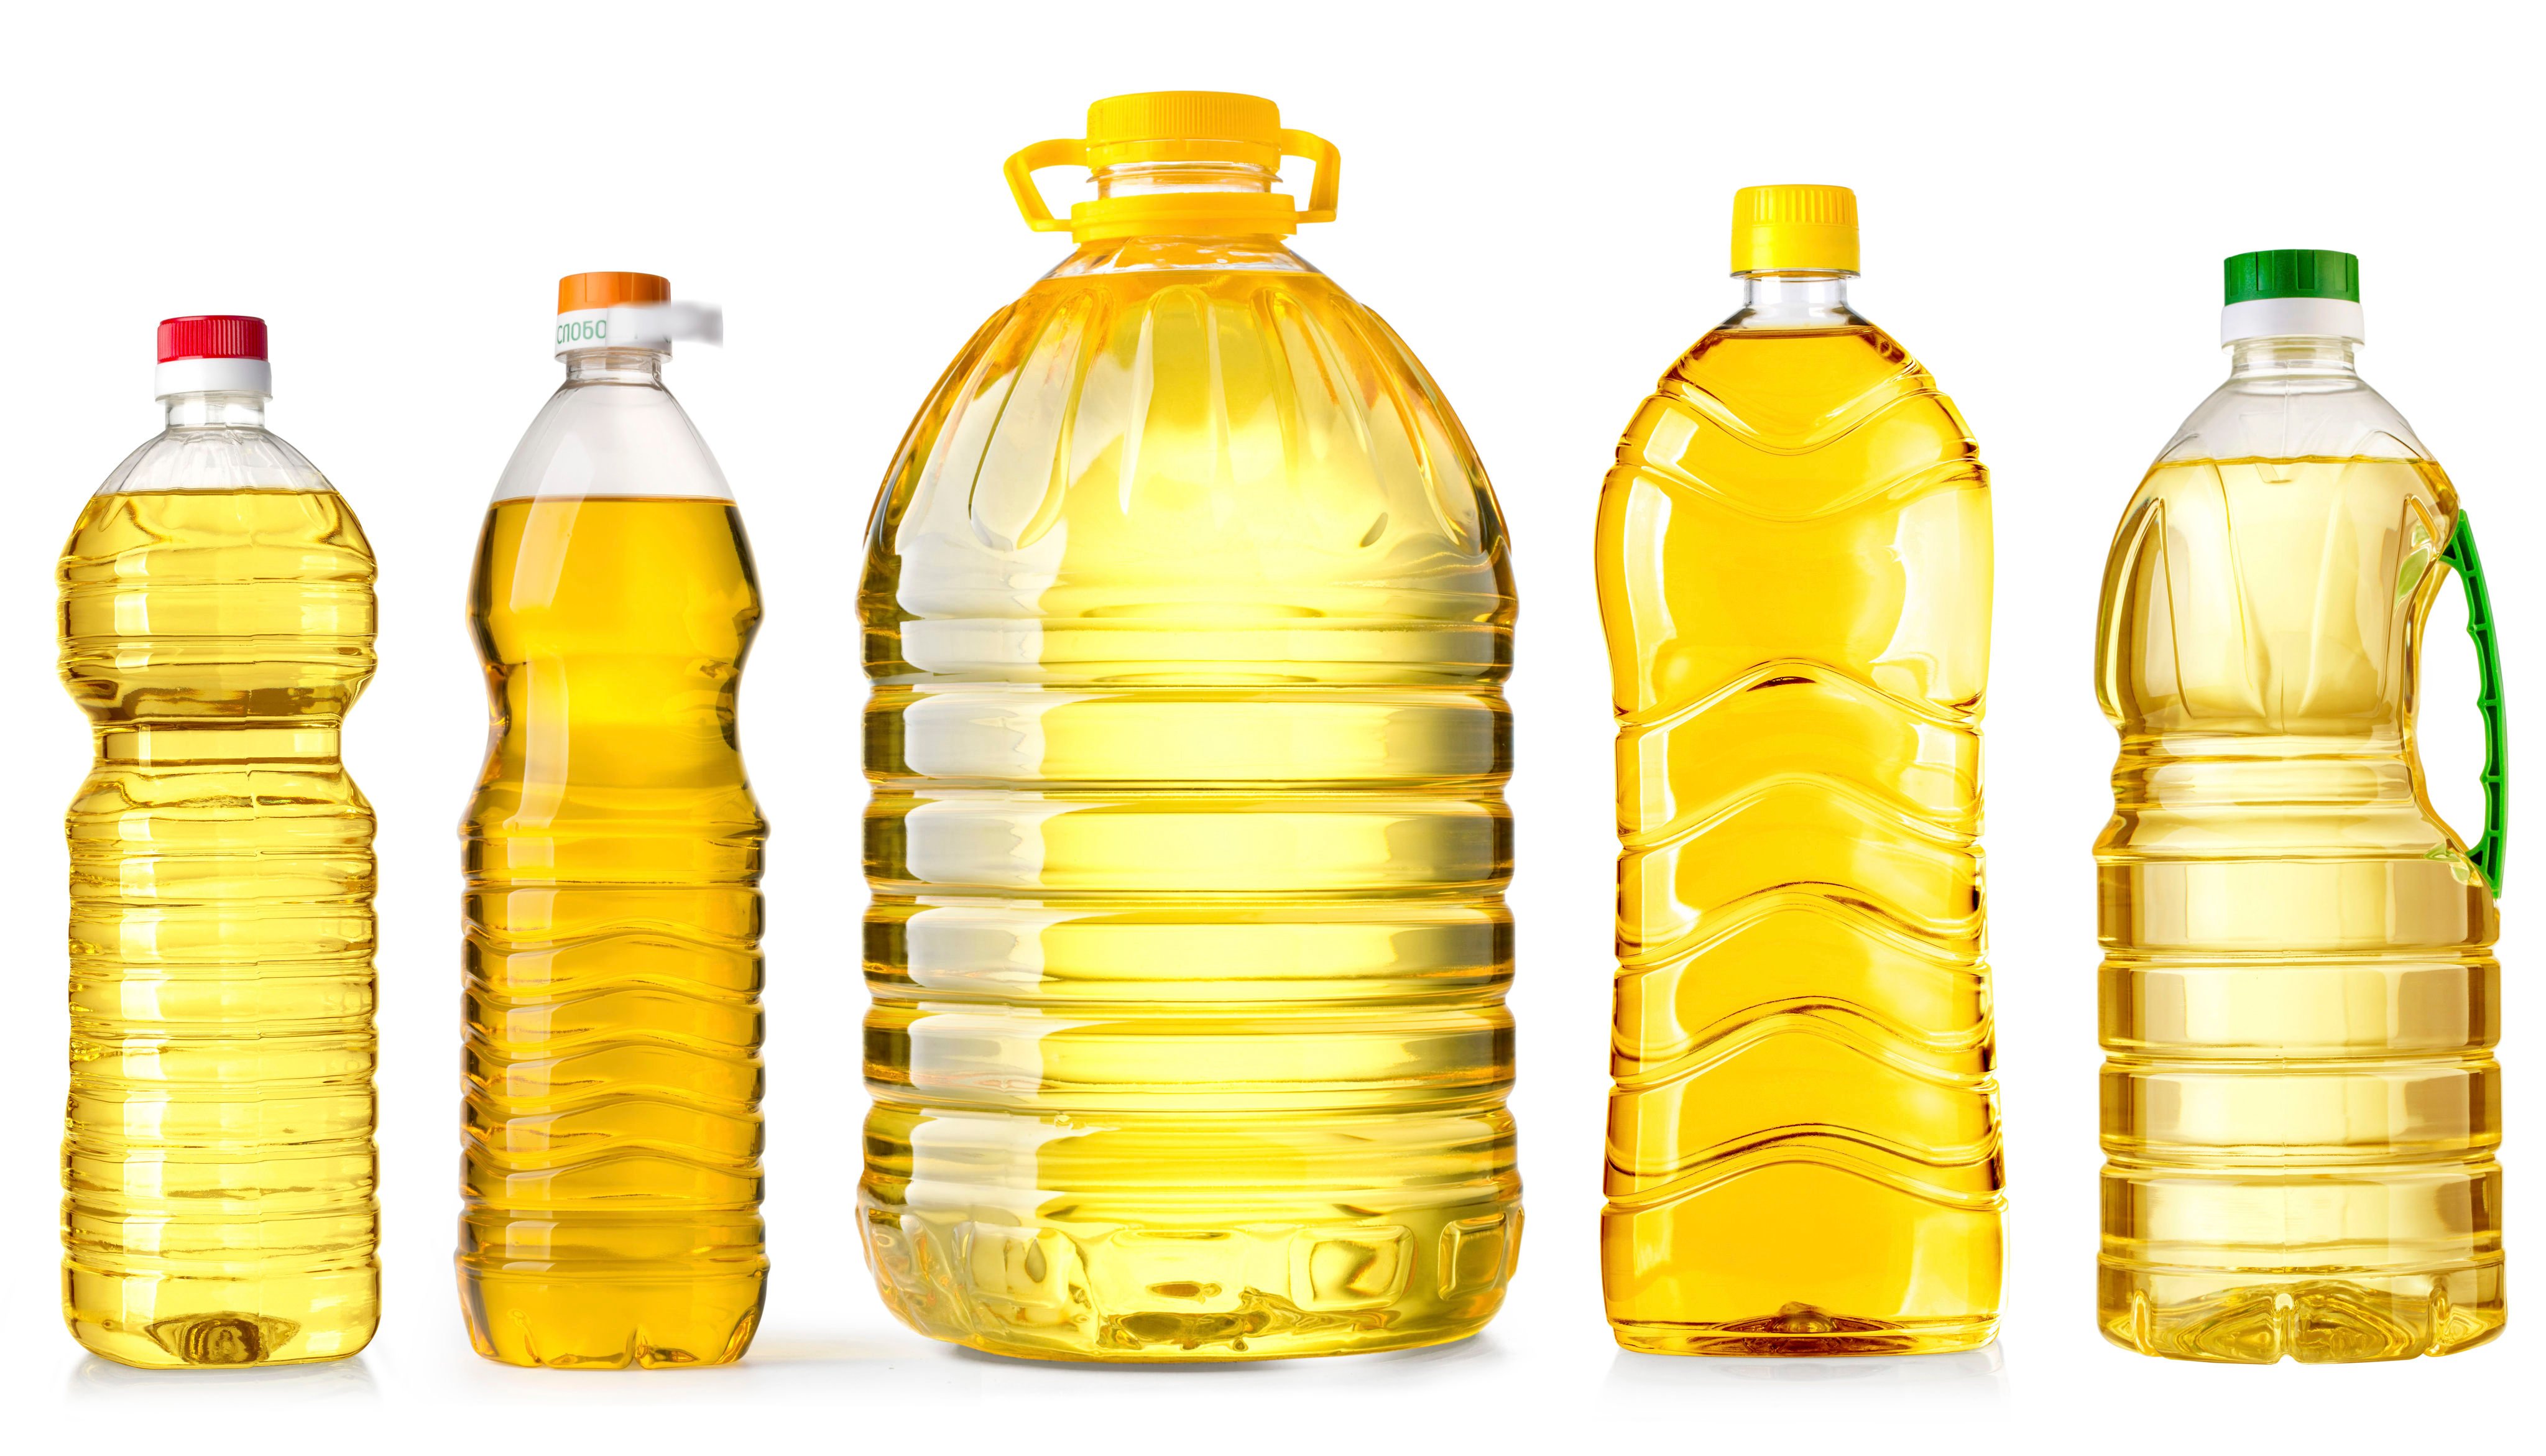 Cooking oil will not last forever in your pantry or kitchen cupboard without going bad, so beware of buying in bulk. The packaging affects how long your oil will last because exposure to light speeds up the oxidation that turns it rancid, studies show. Photo: Shutterstock